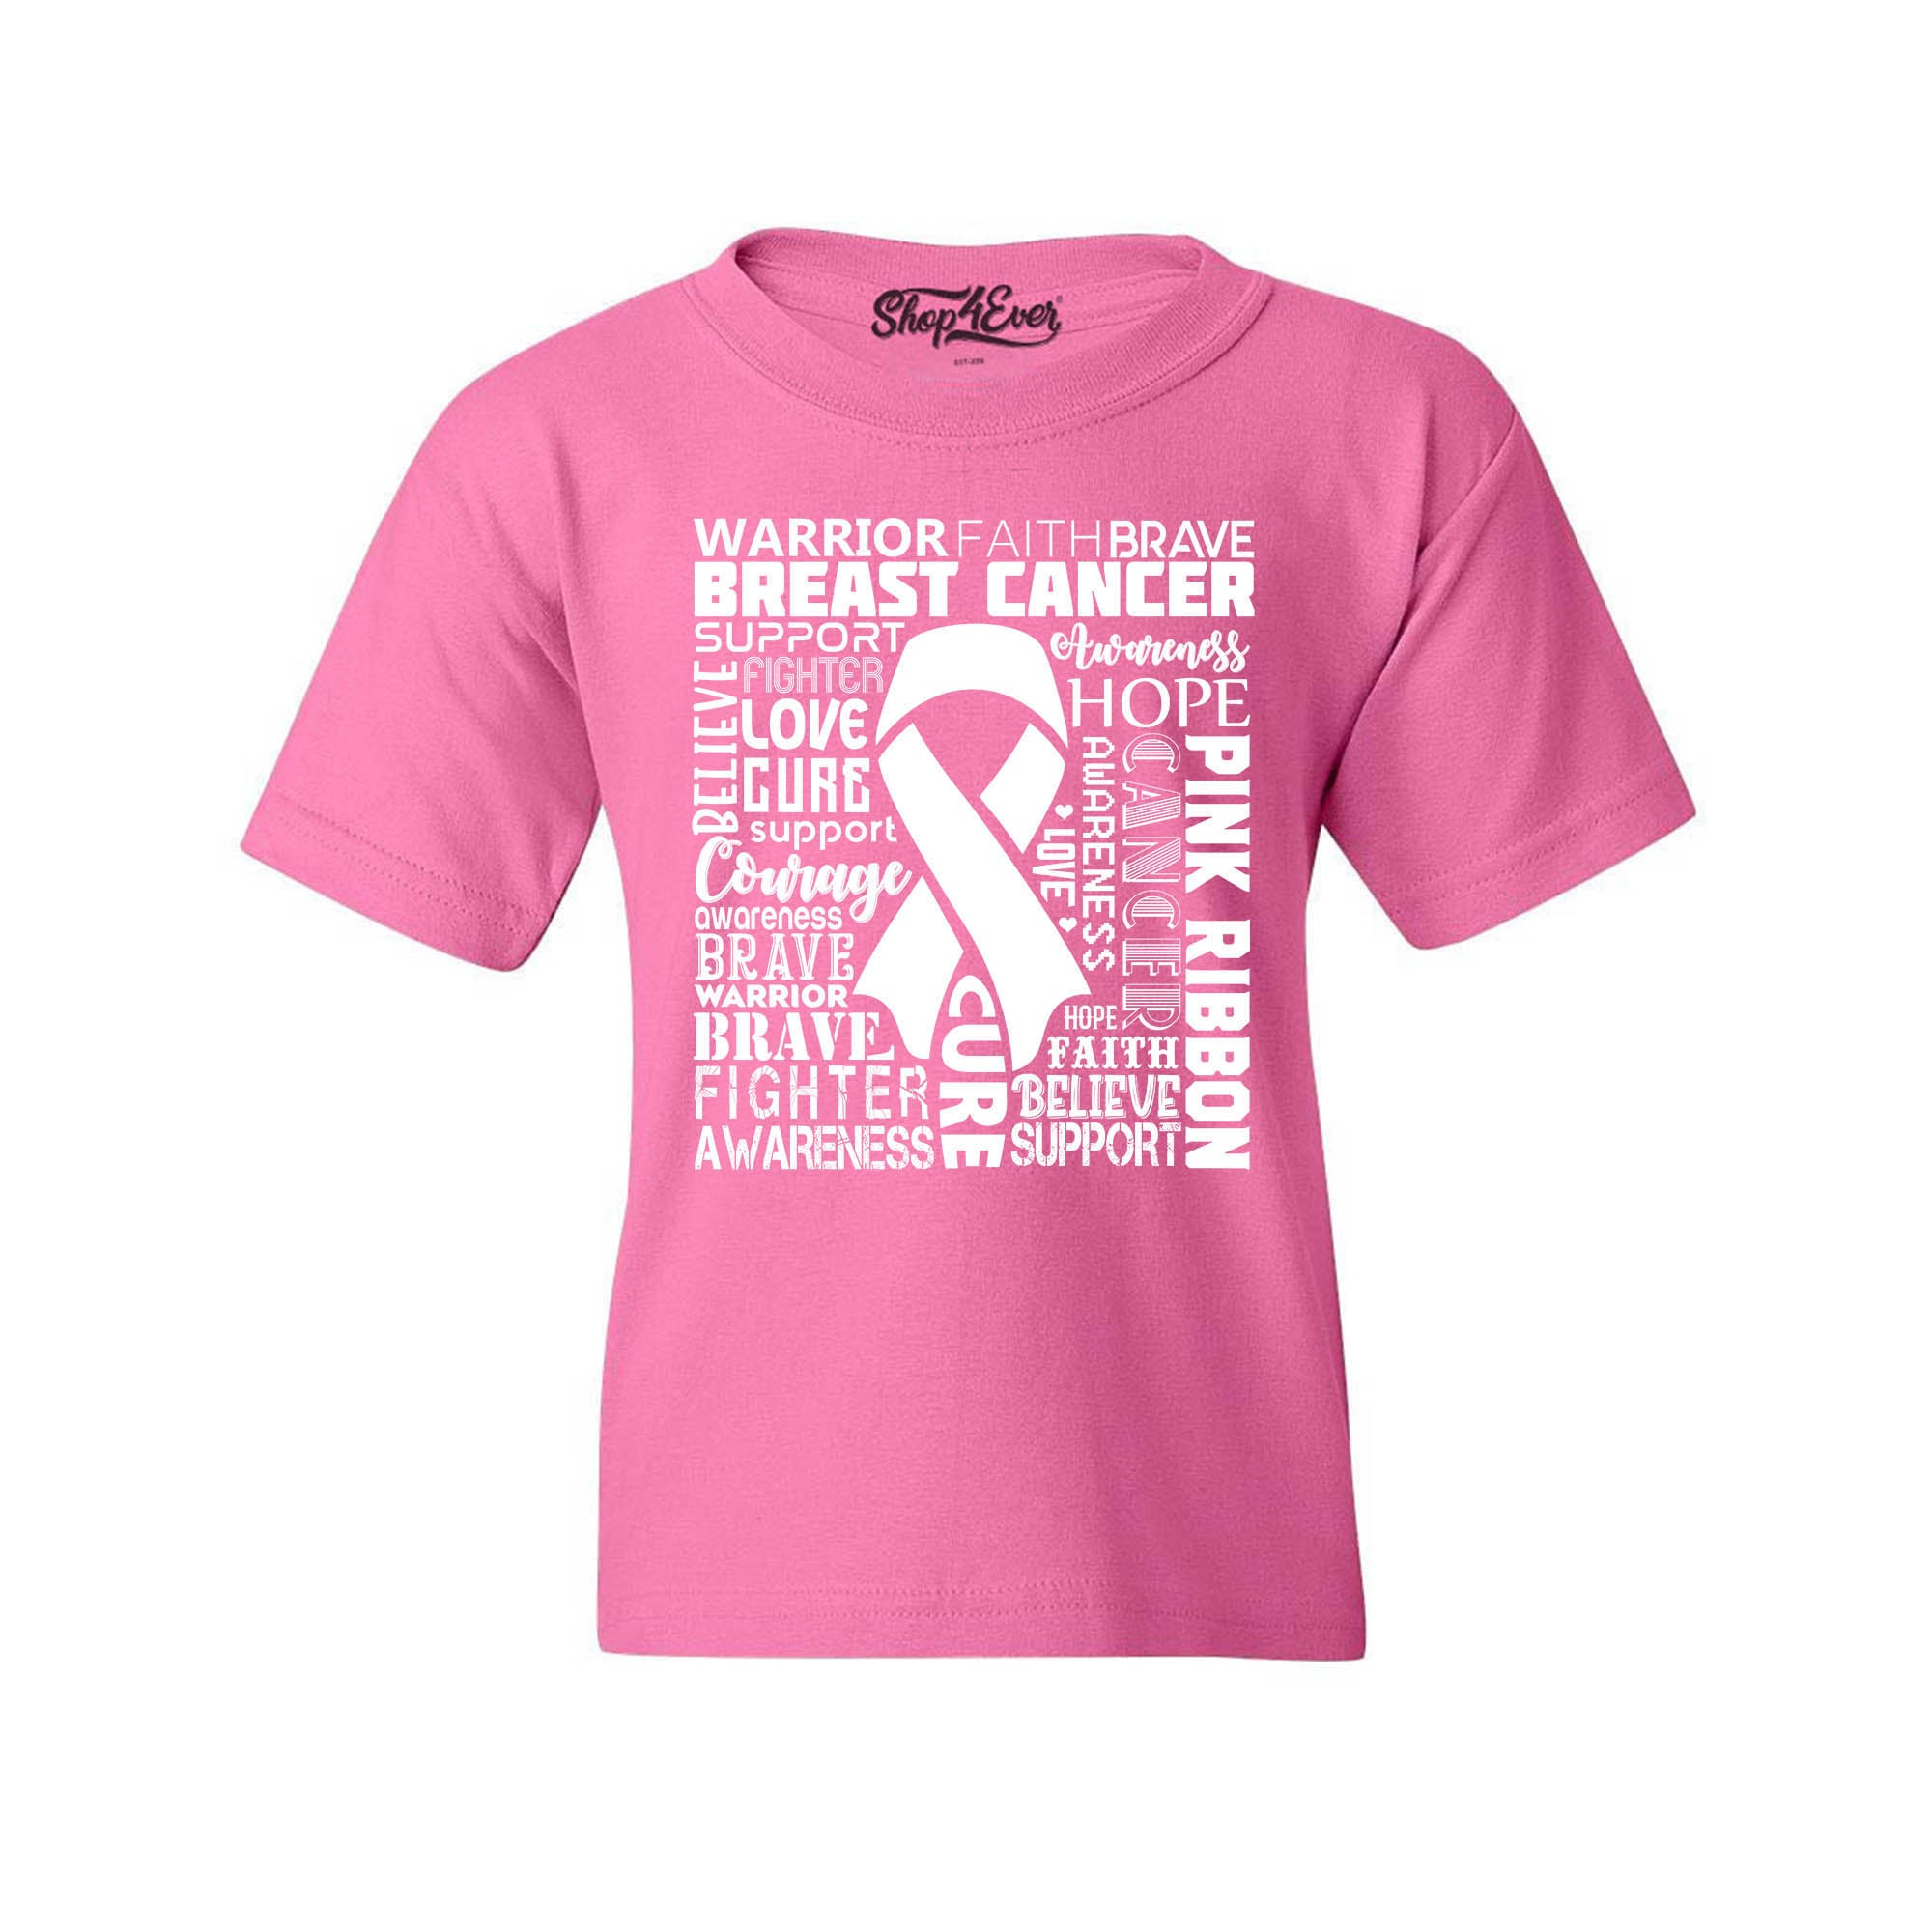 Breast Cancer Awareness White Ribbon Word Cloud Child's T-Shirt Kids Tee